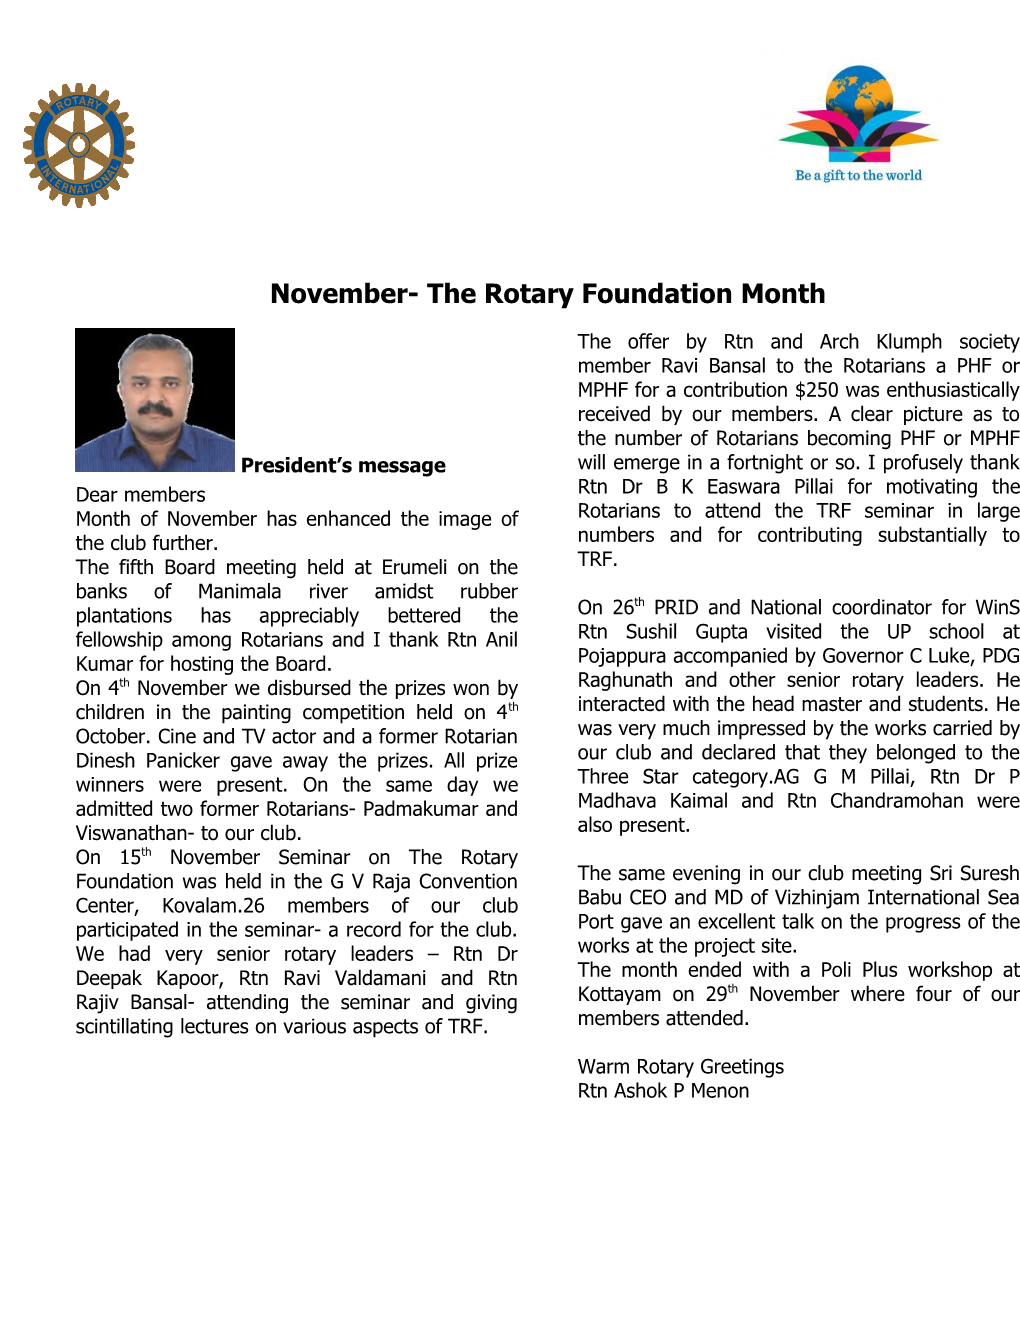 November- the Rotary Foundation Month